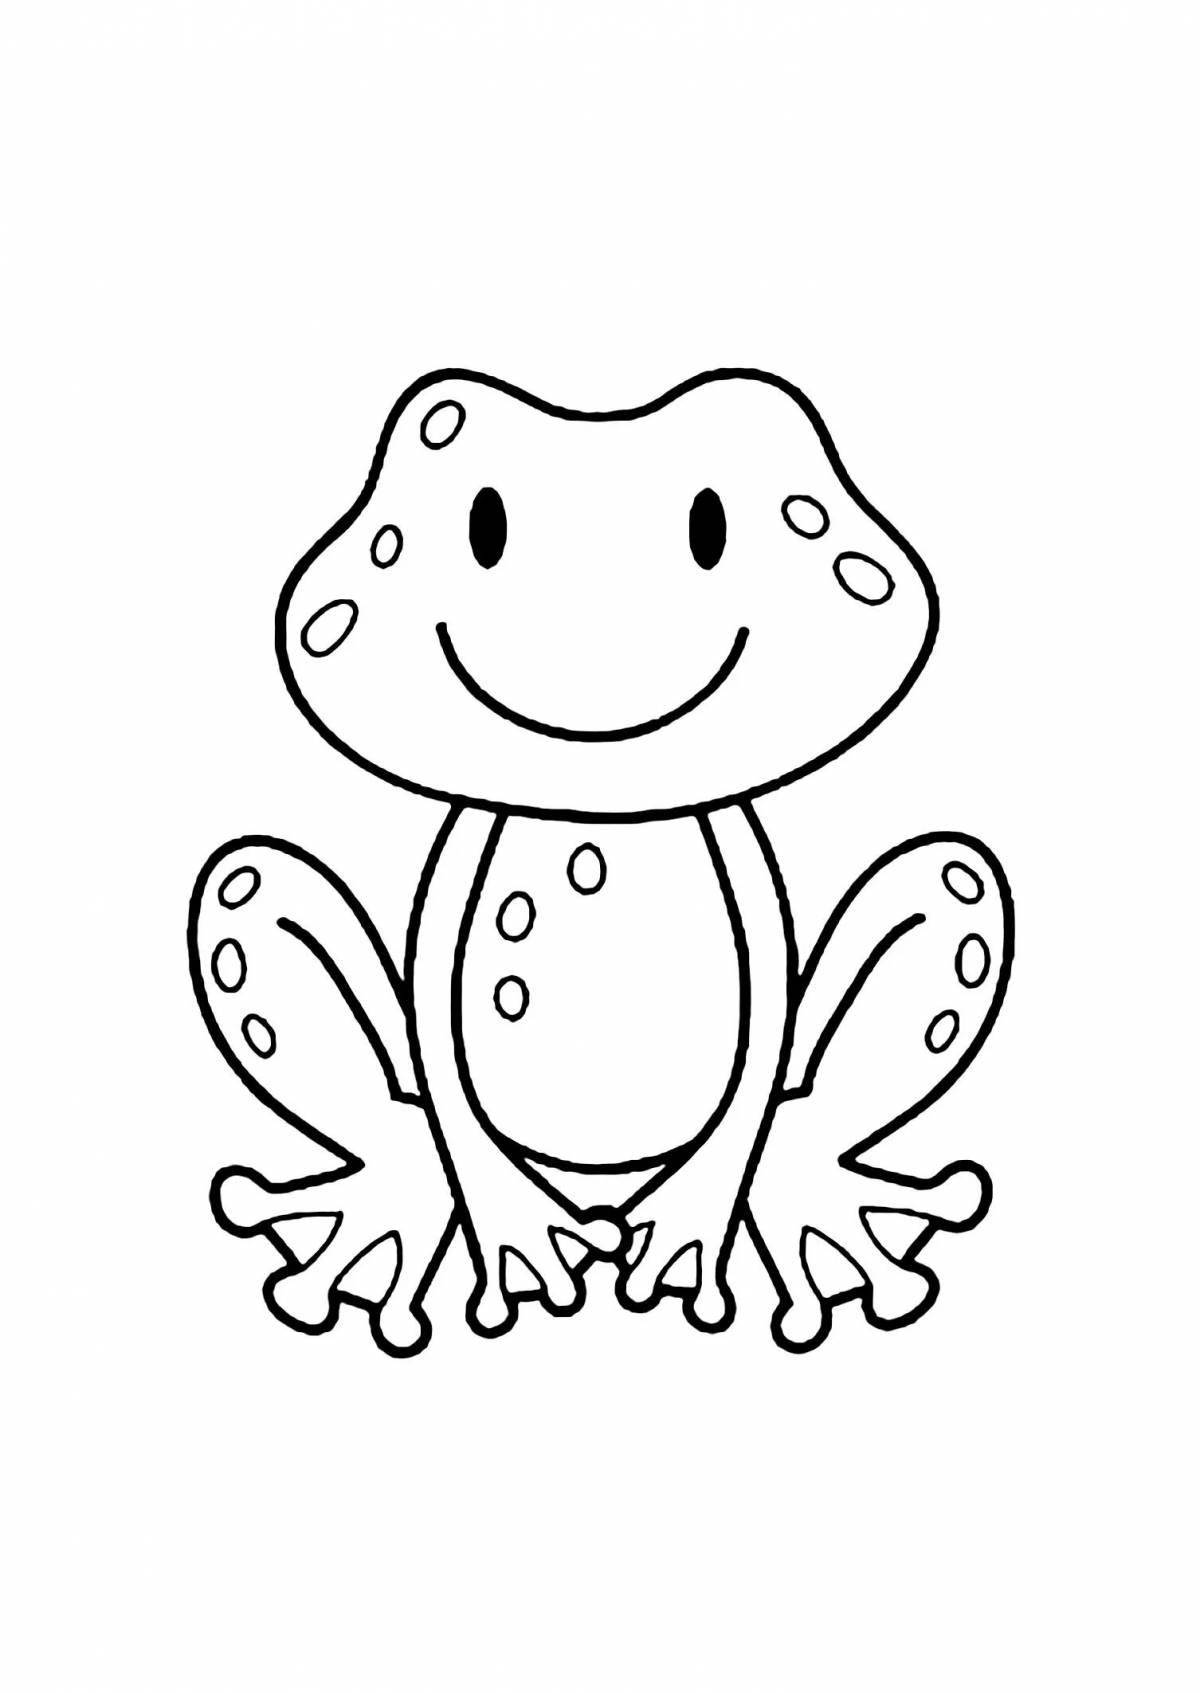 Glitter frog coloring page